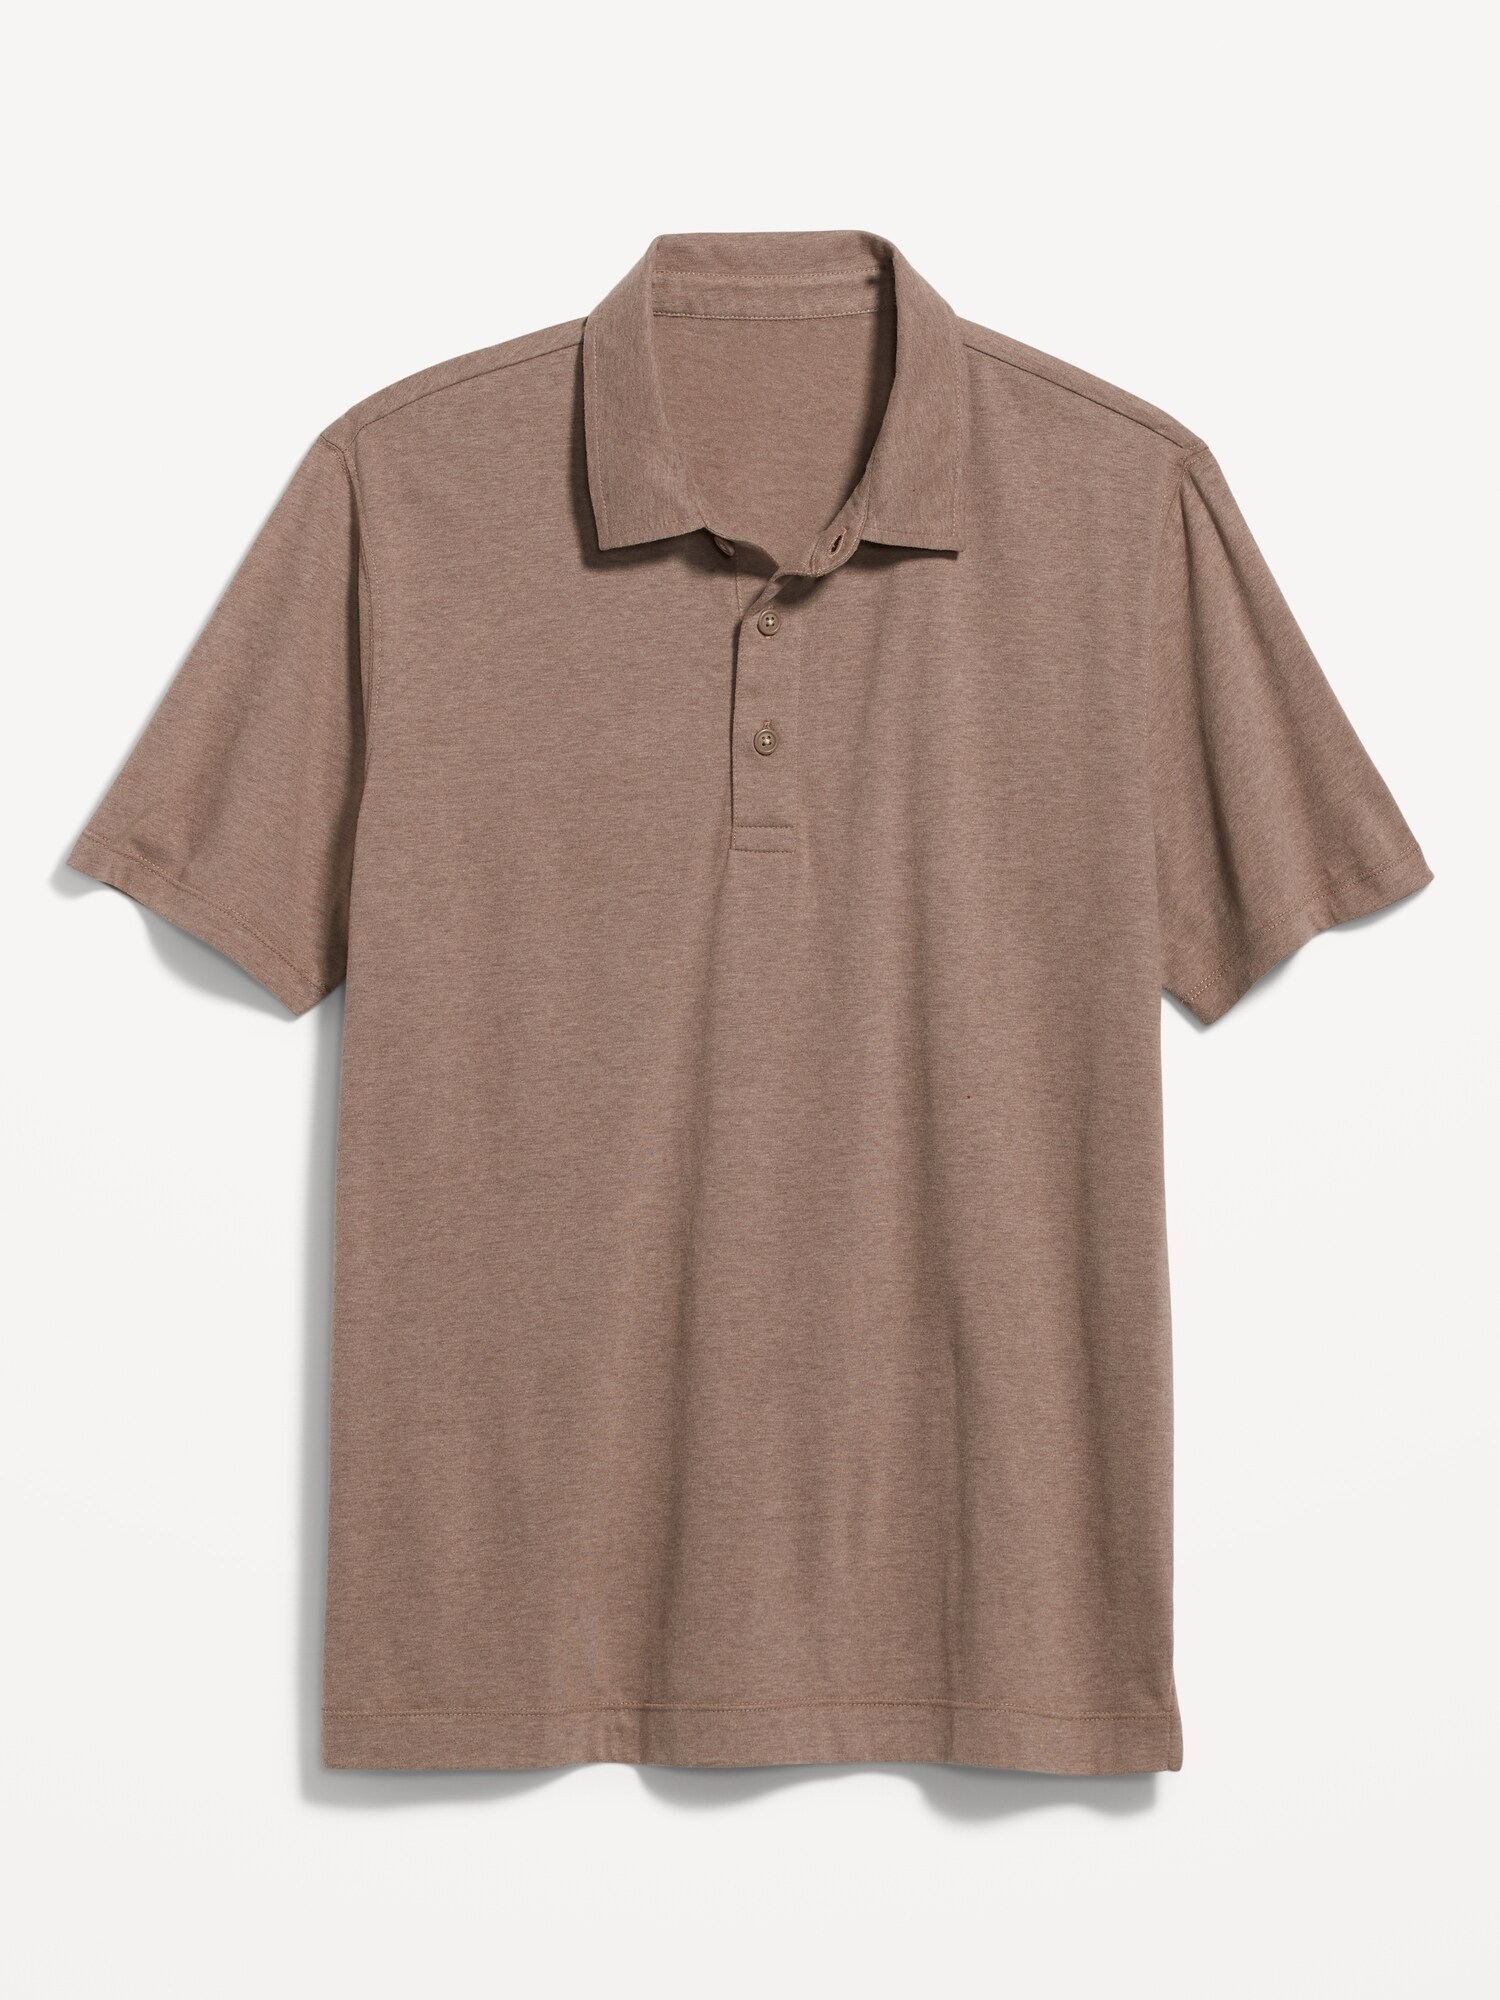 Old Navy Classic Fit Jersey Polo for Men beige. 1